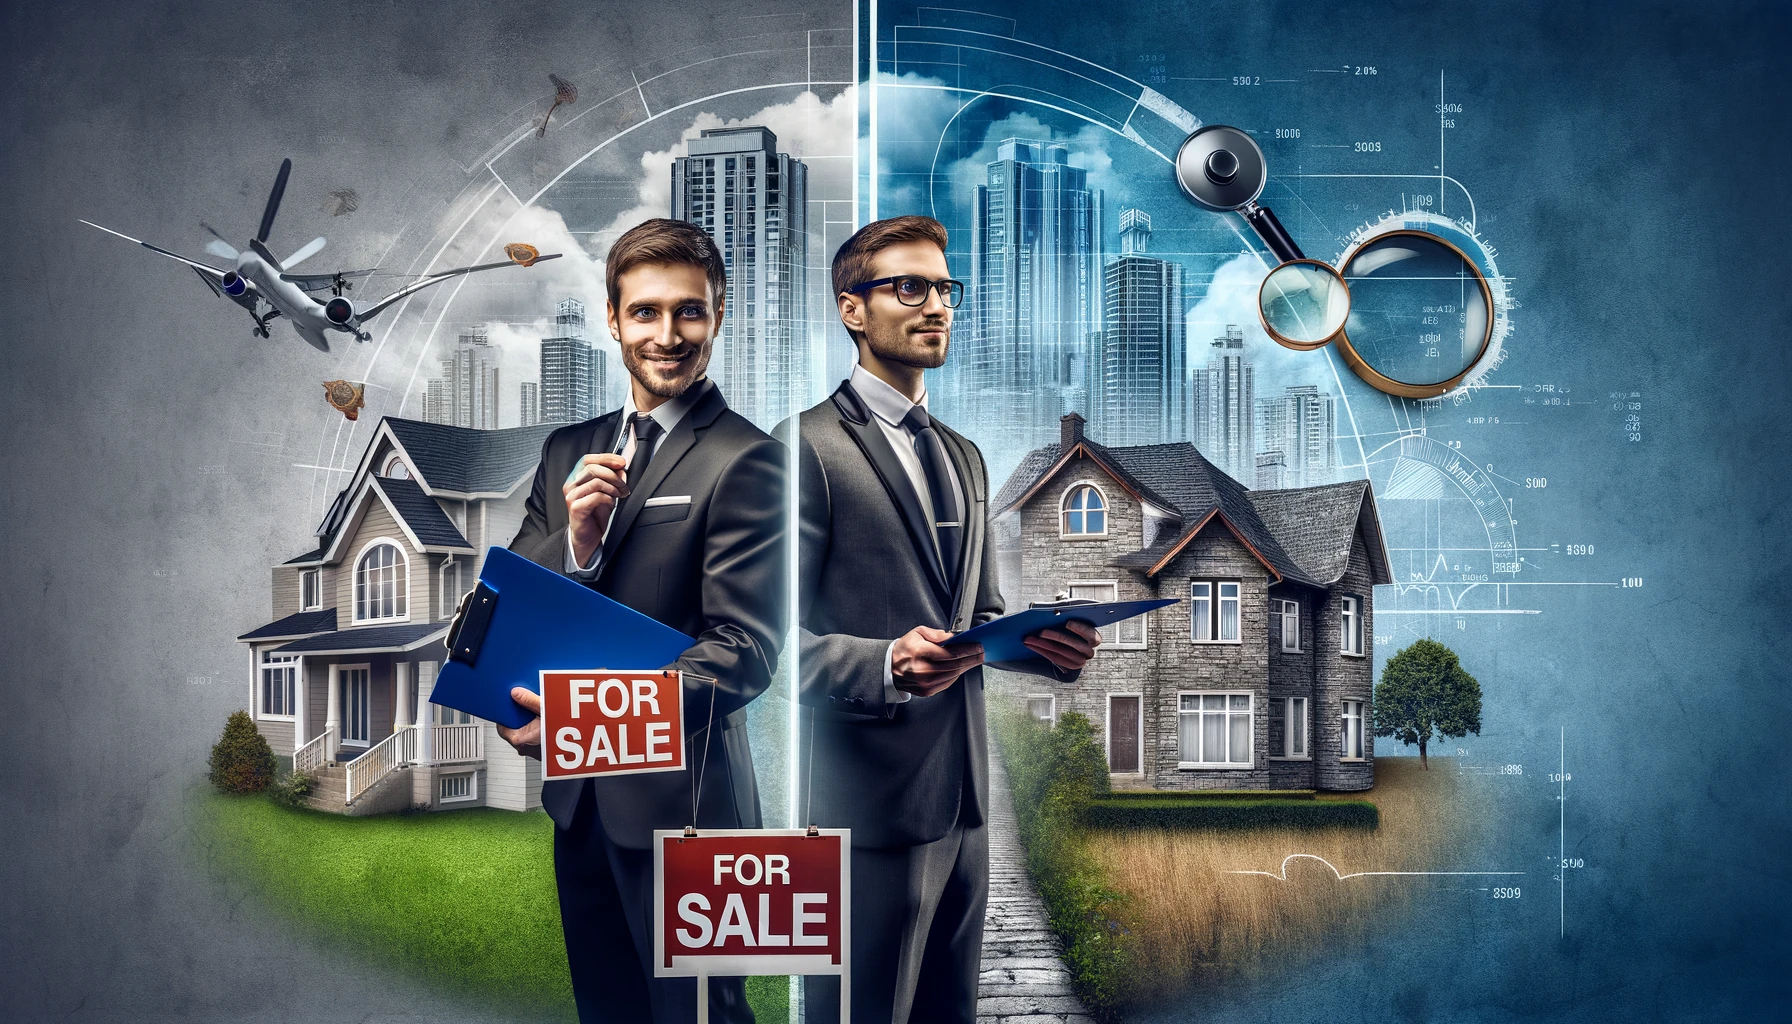 Can You Be an Appraiser and Real Estate Agent?